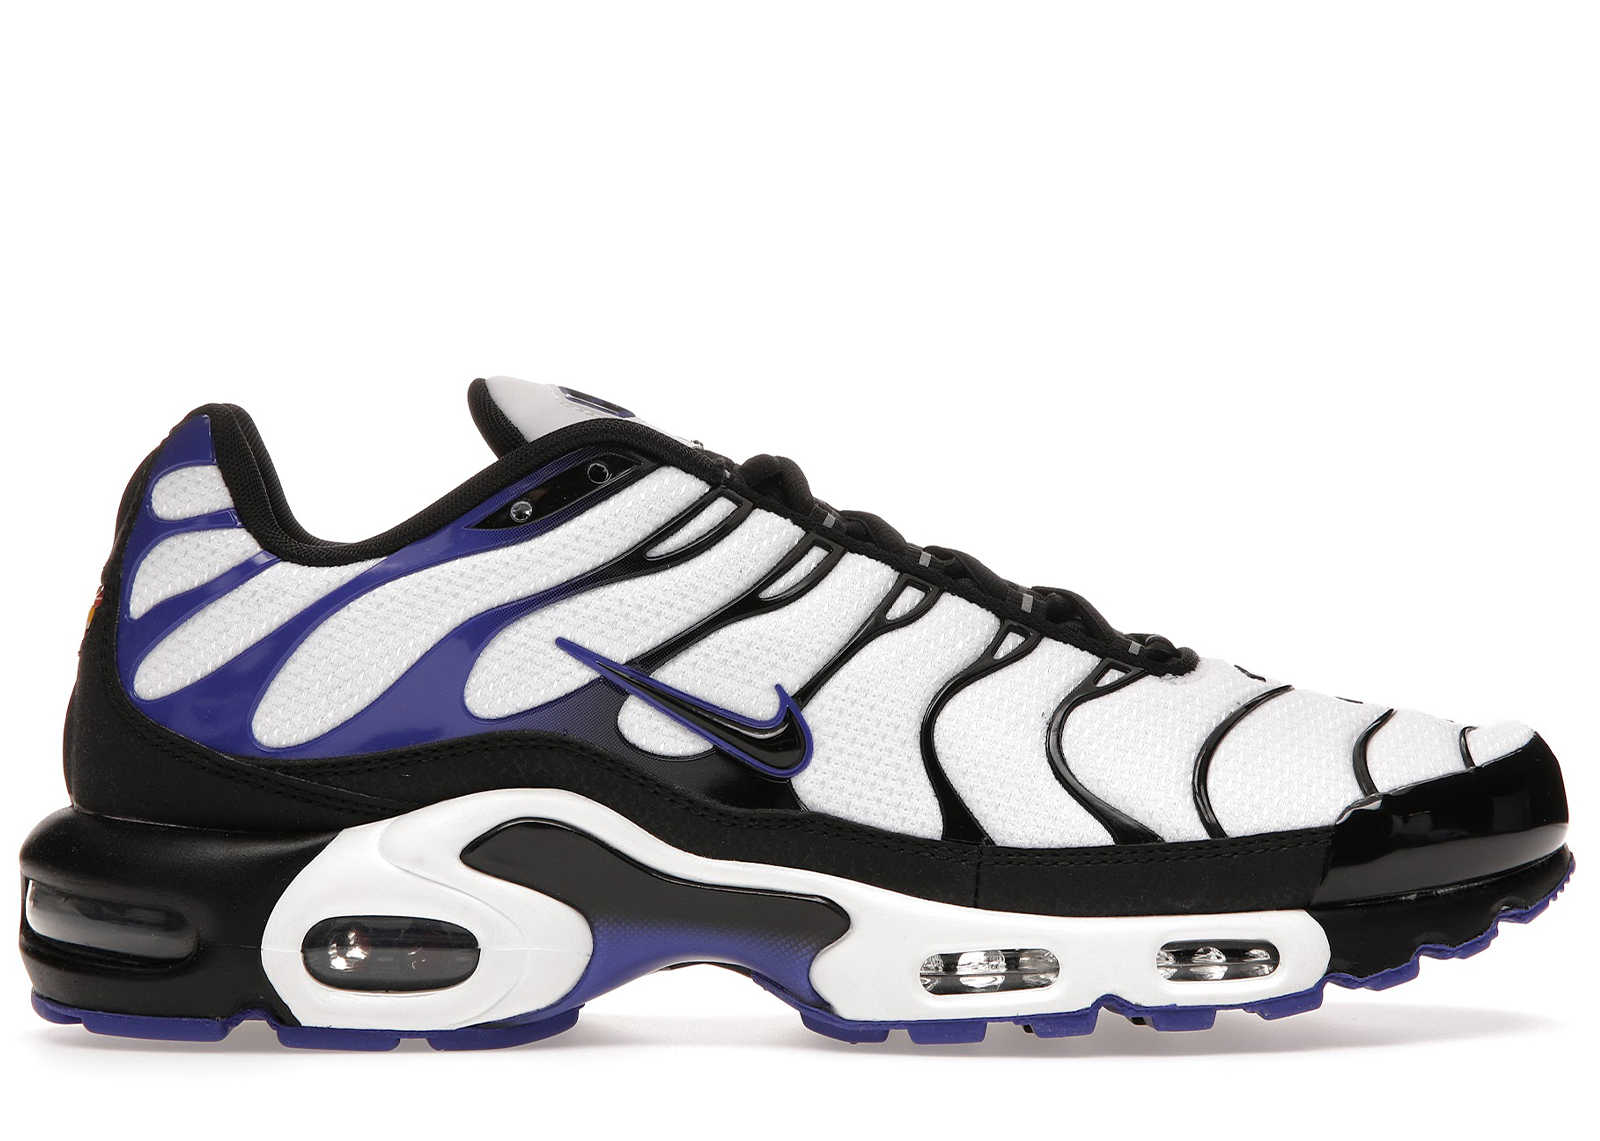 Buy Nike Air Max Plus Shoes & Deadstock Sneakers شخصيات قيم اوف ثرونز